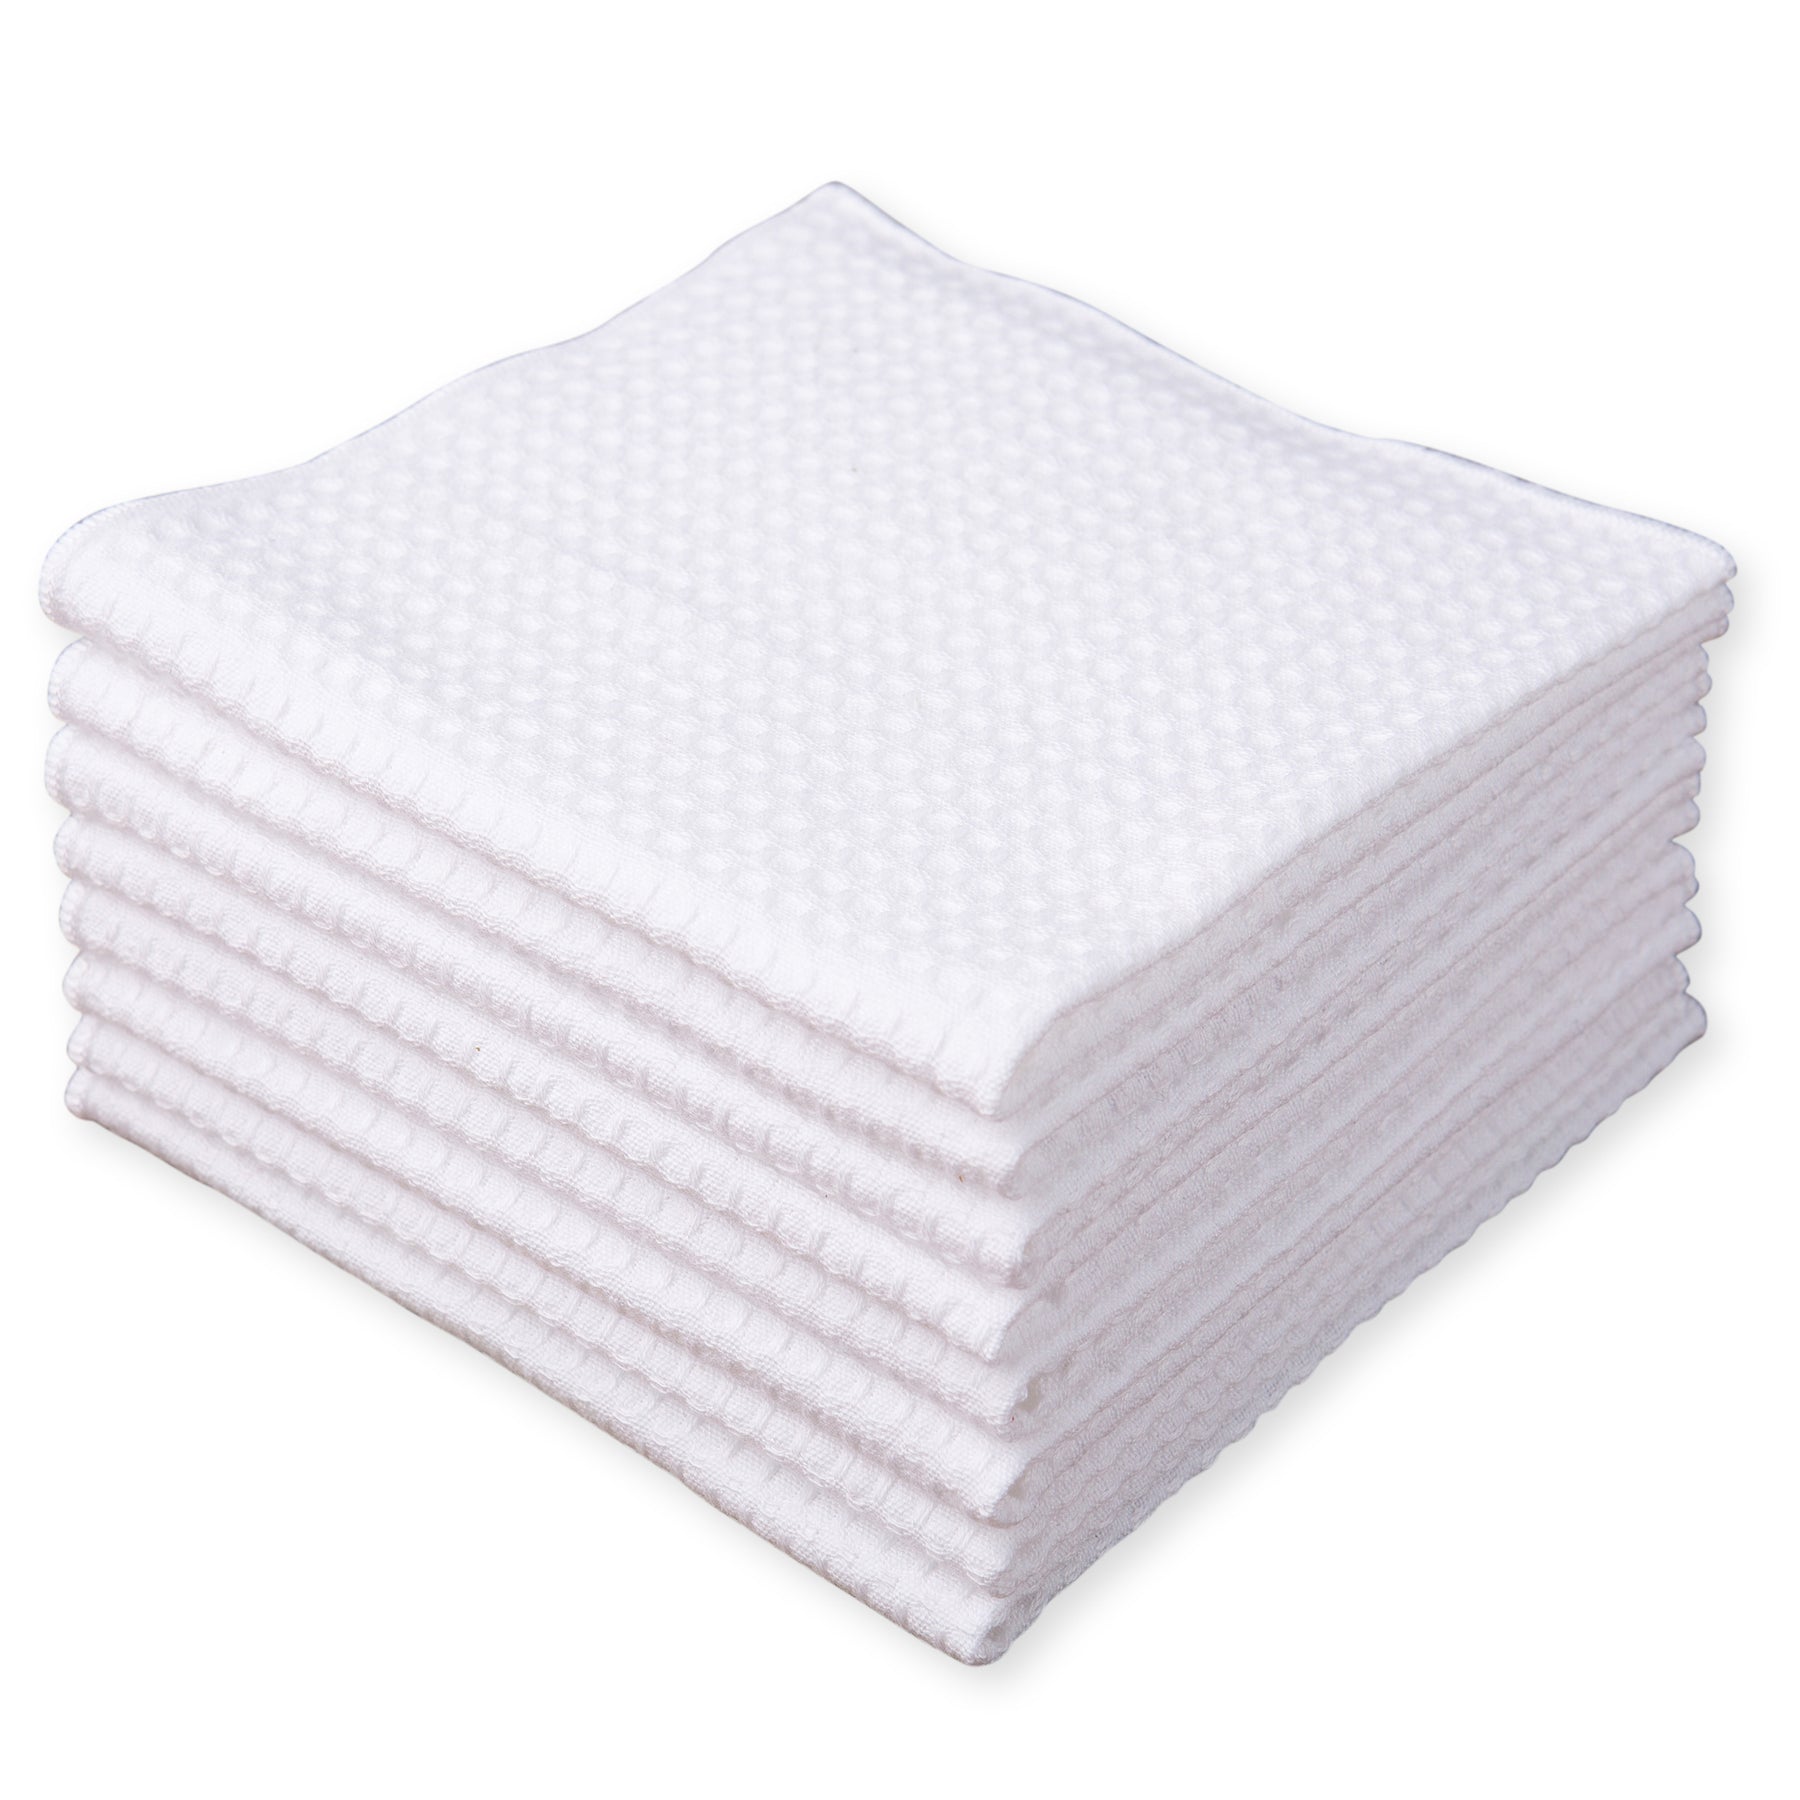 Chef Approved Striped White Waffle Weave Cotton Dish Cloth - 13L x 15W